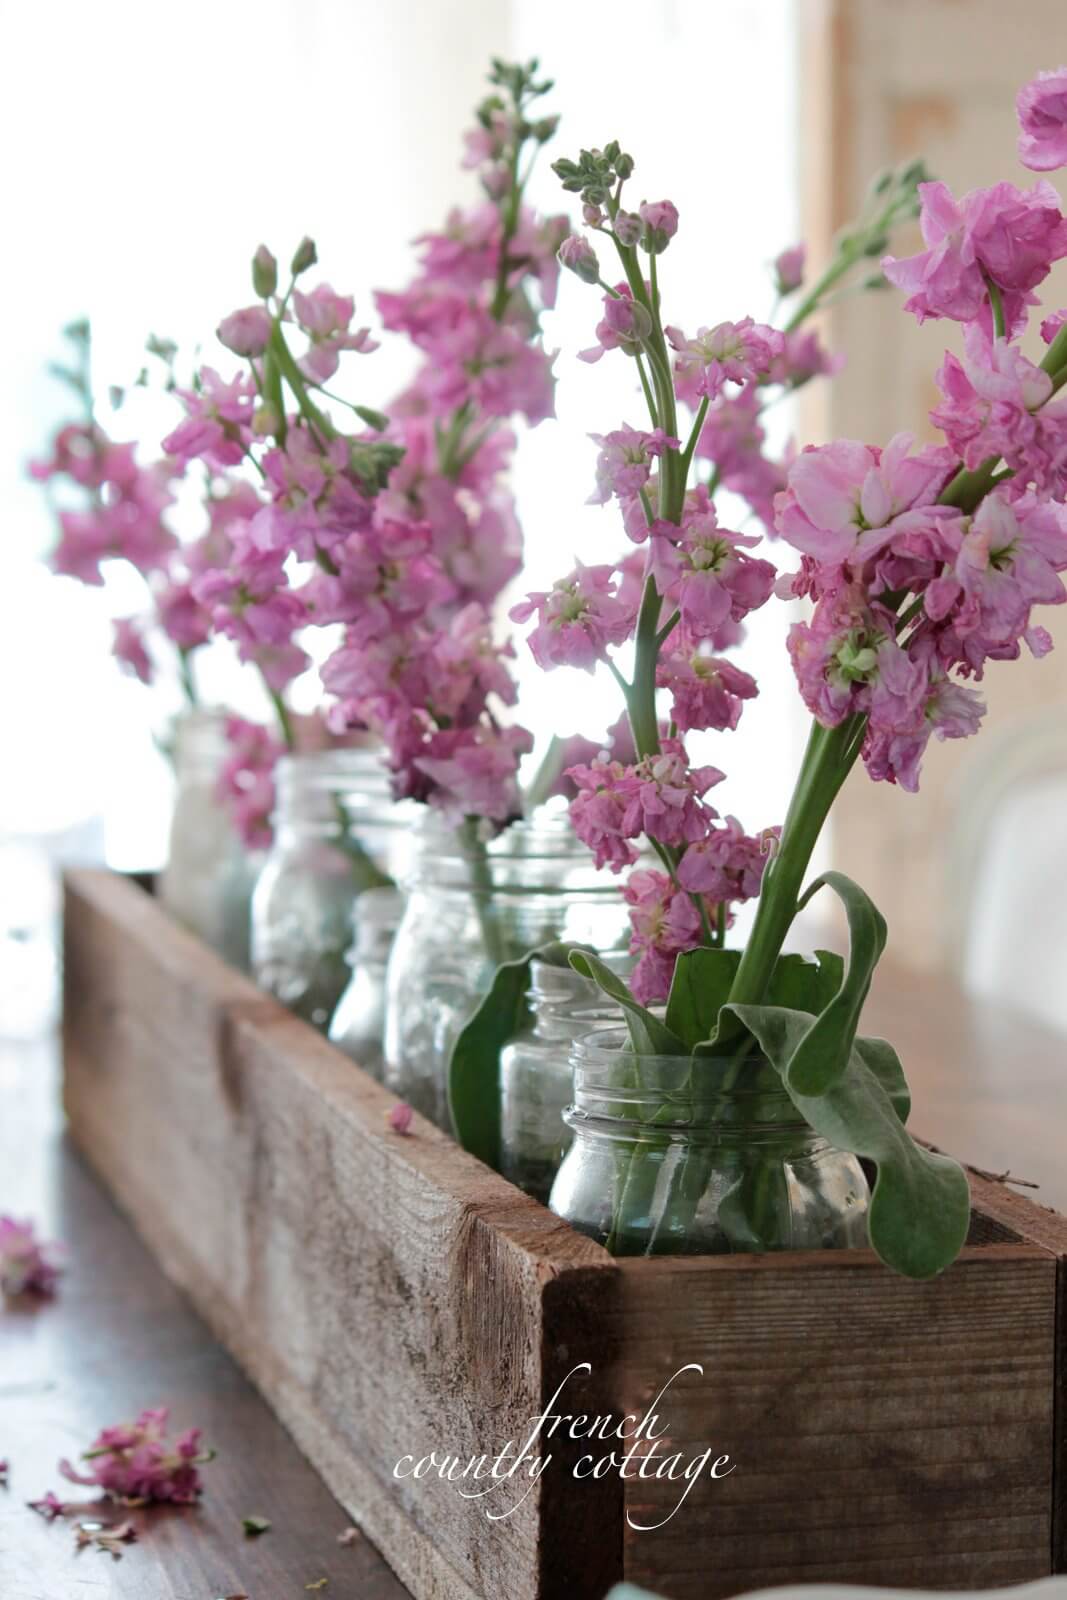 A Basic Floral Rustic Wooden Box Centerpiece